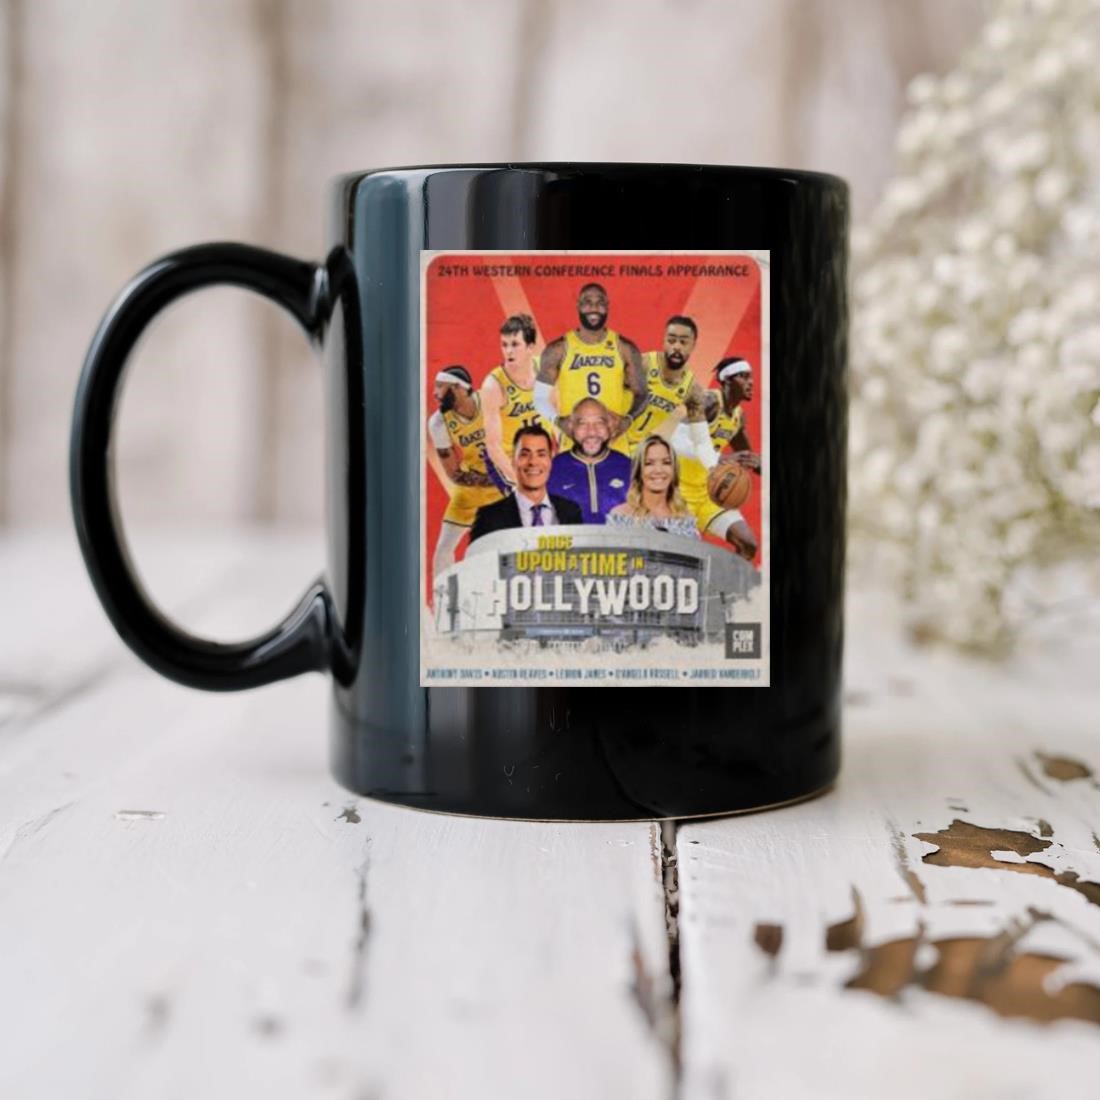 Los Angeles Lakers 24th Western Conference Finals Appearance Once Upon A Time In Hollywood Mug biu.jpg